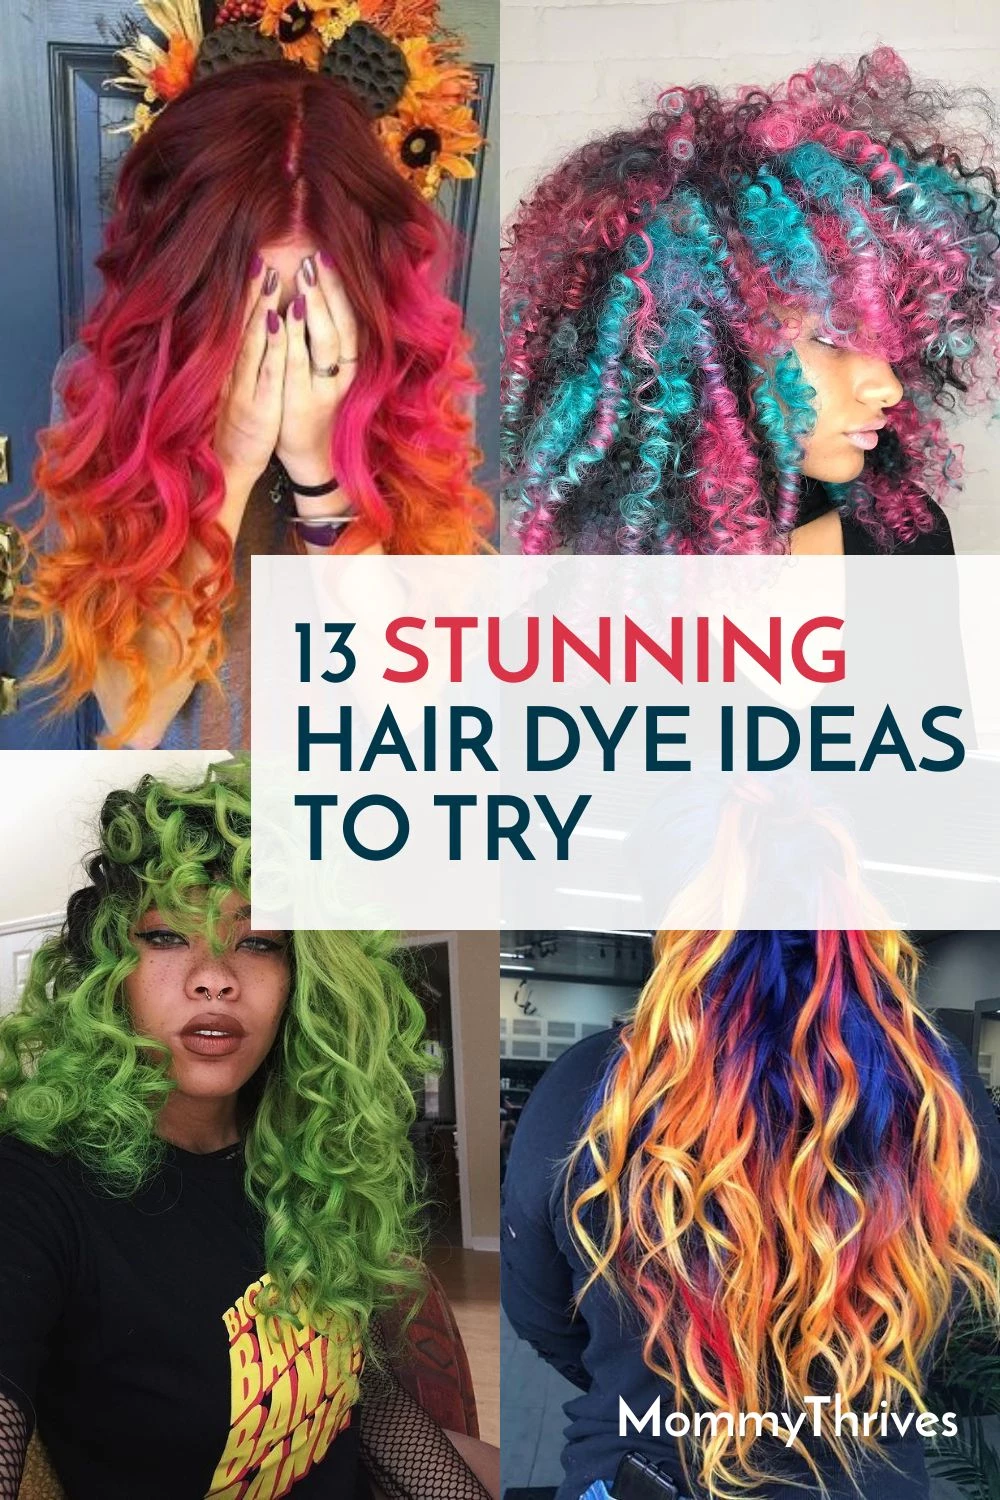 Colored Hair Ideas Unique Hair Dye Colors to Try